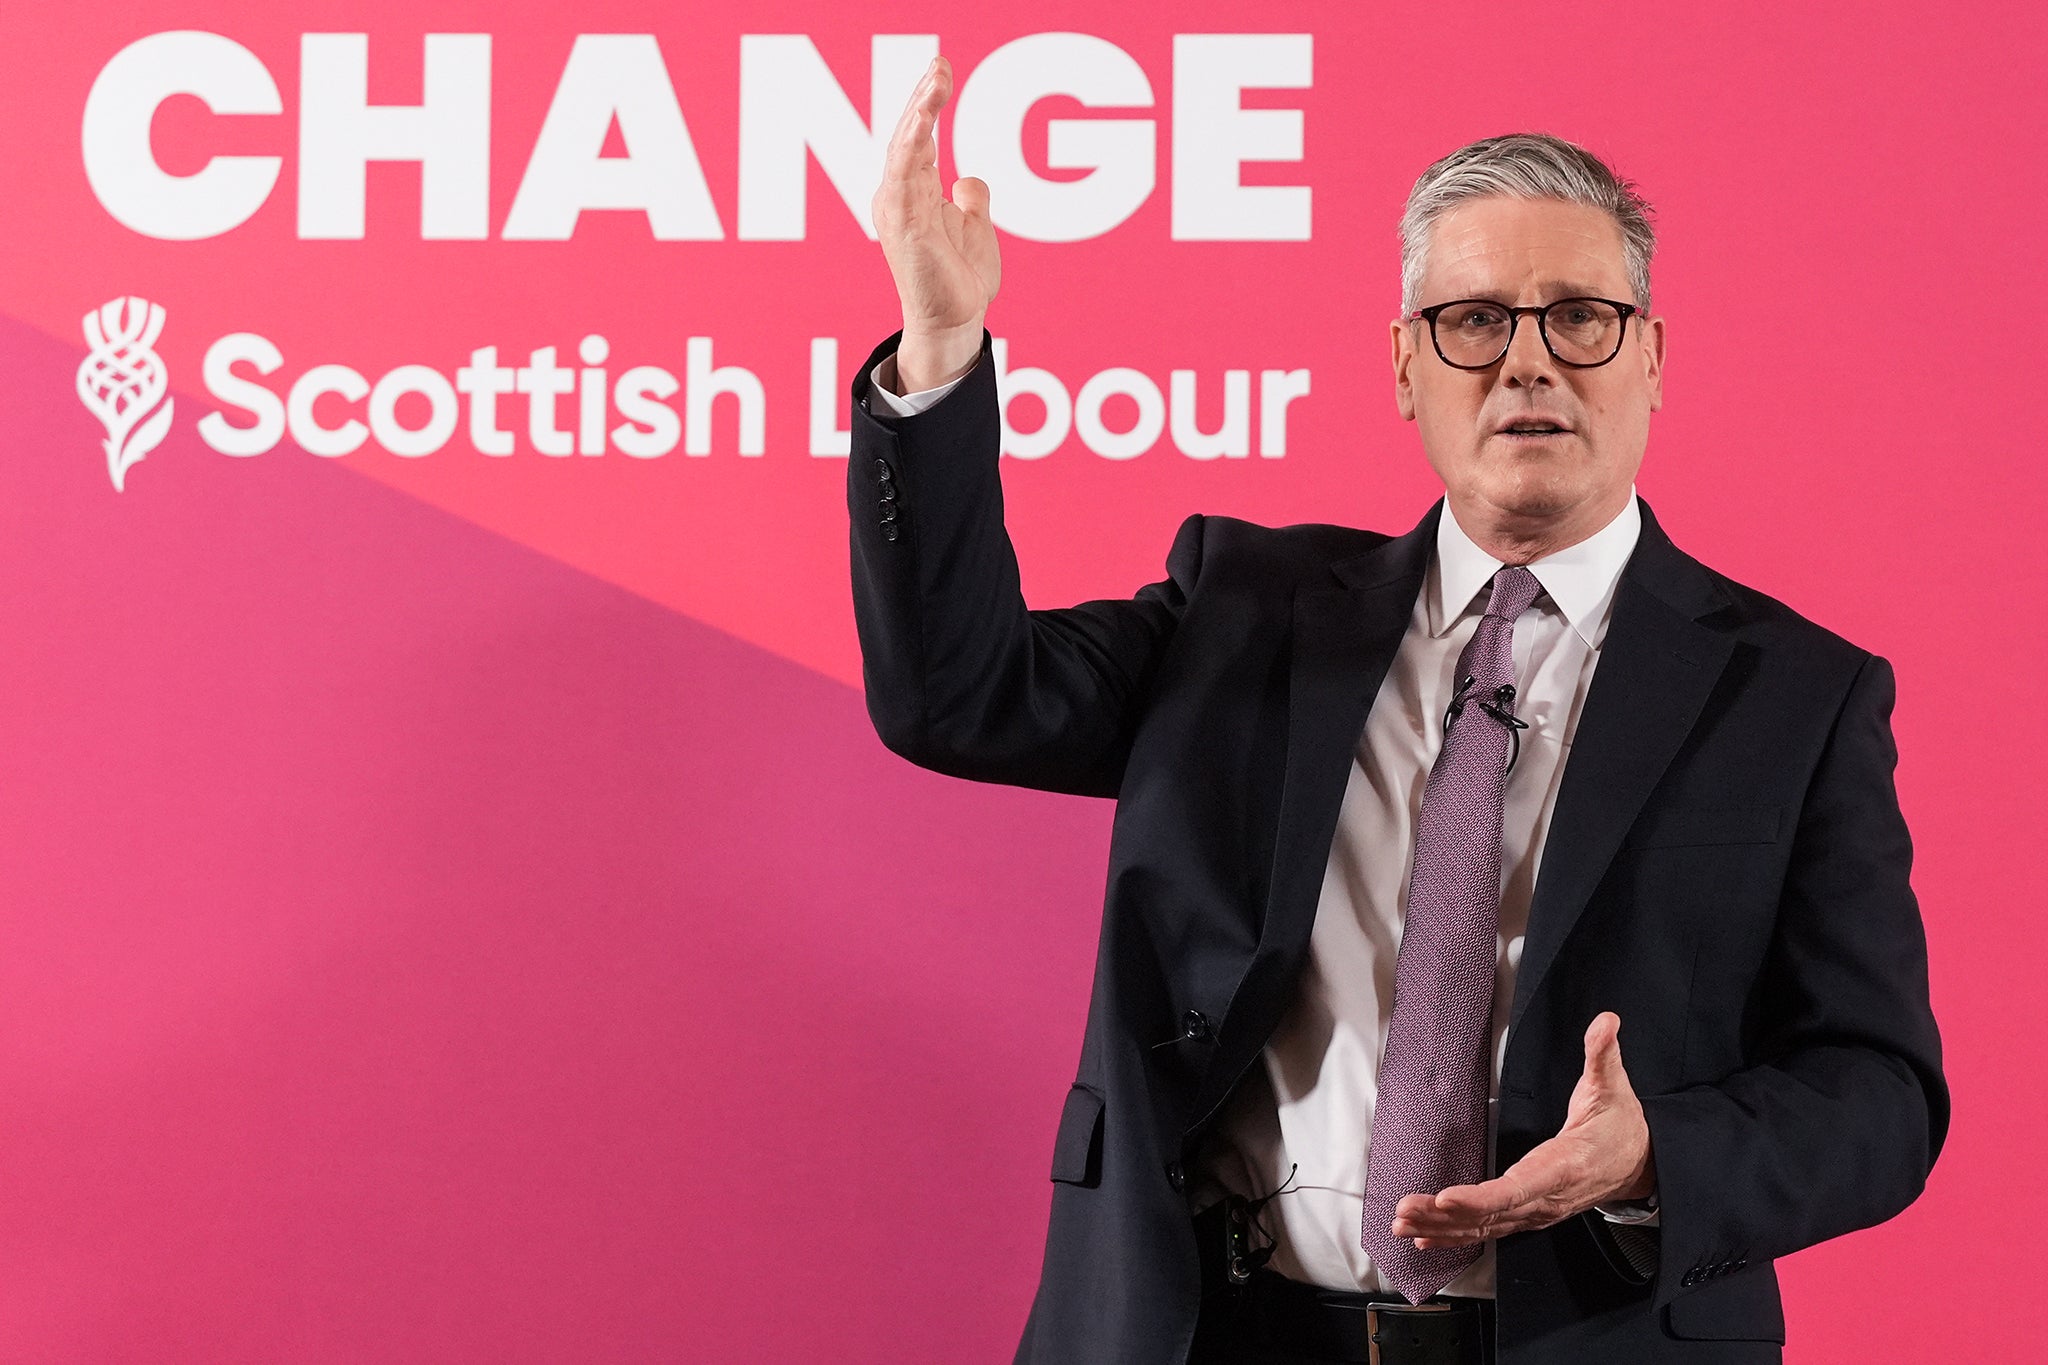 Labour Party leader Sir Keir Starmer at a launch event for Labour's six steps for change - their doorstep offer to Scots - at the Beacons Art Centre in Custom House Quay, Greenock